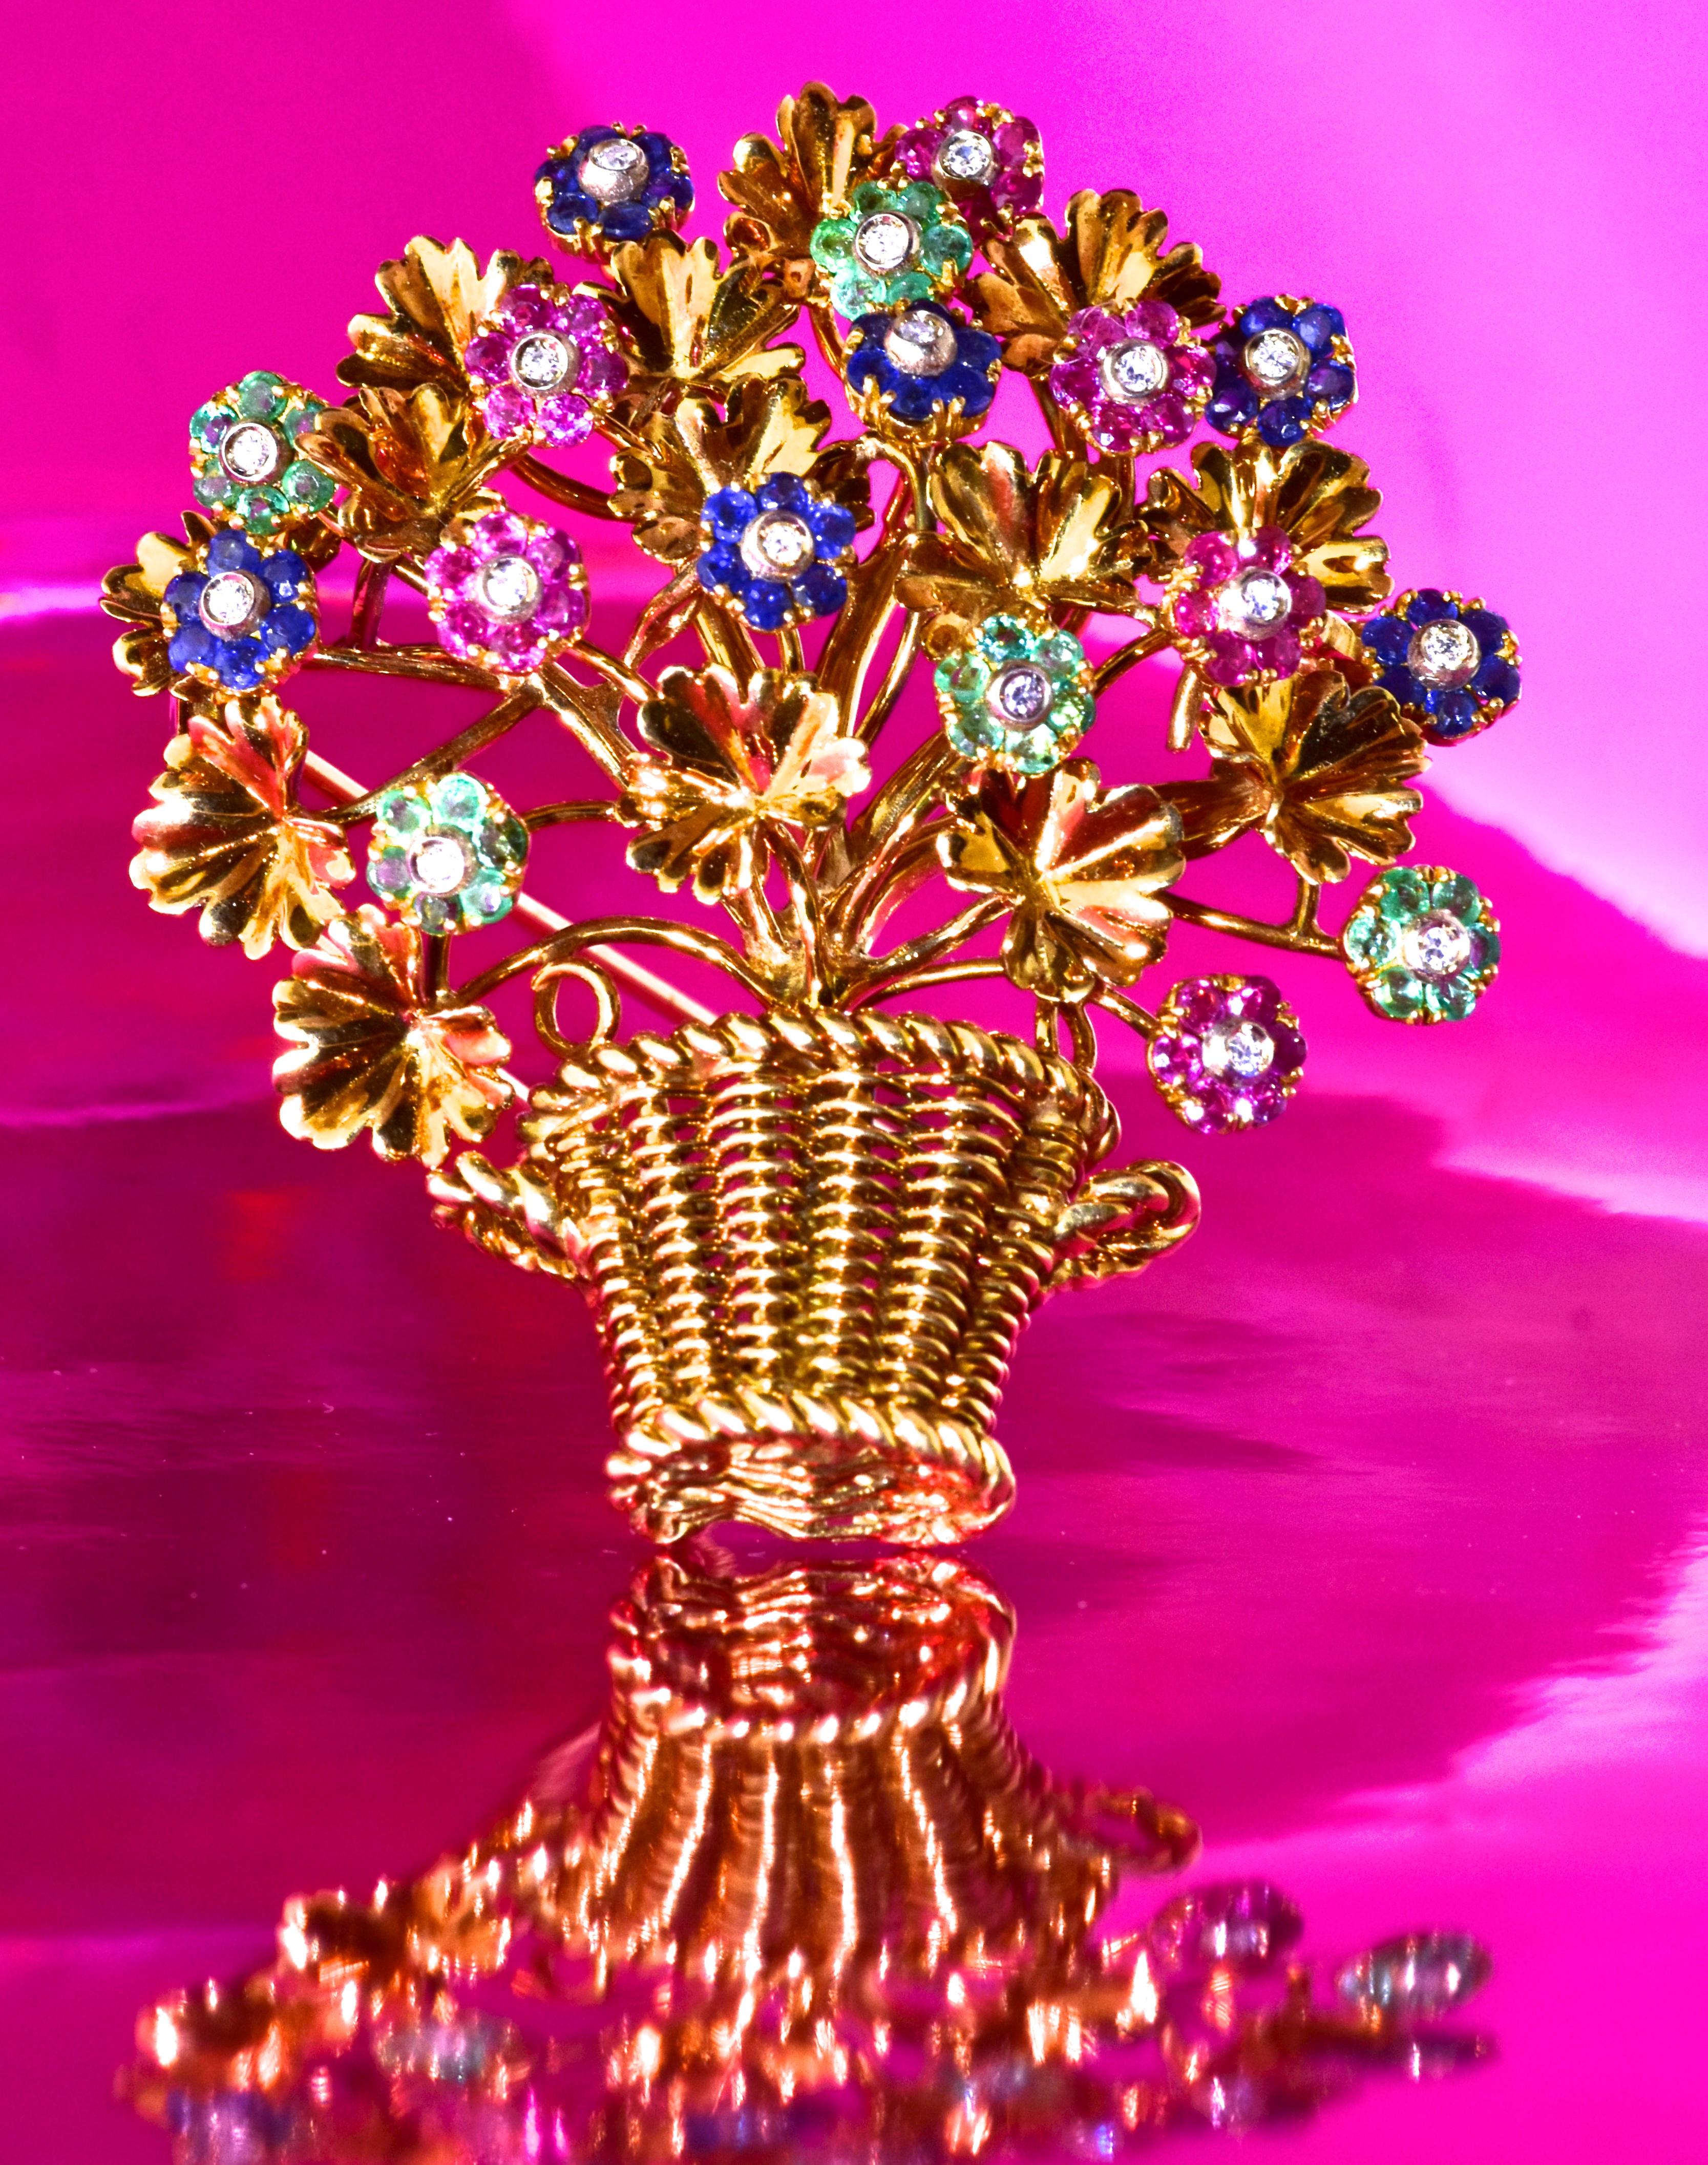 Tiffany & Co. 18K large brooch of a basket of flowers - en tremblant - the flower buds are set so that they 